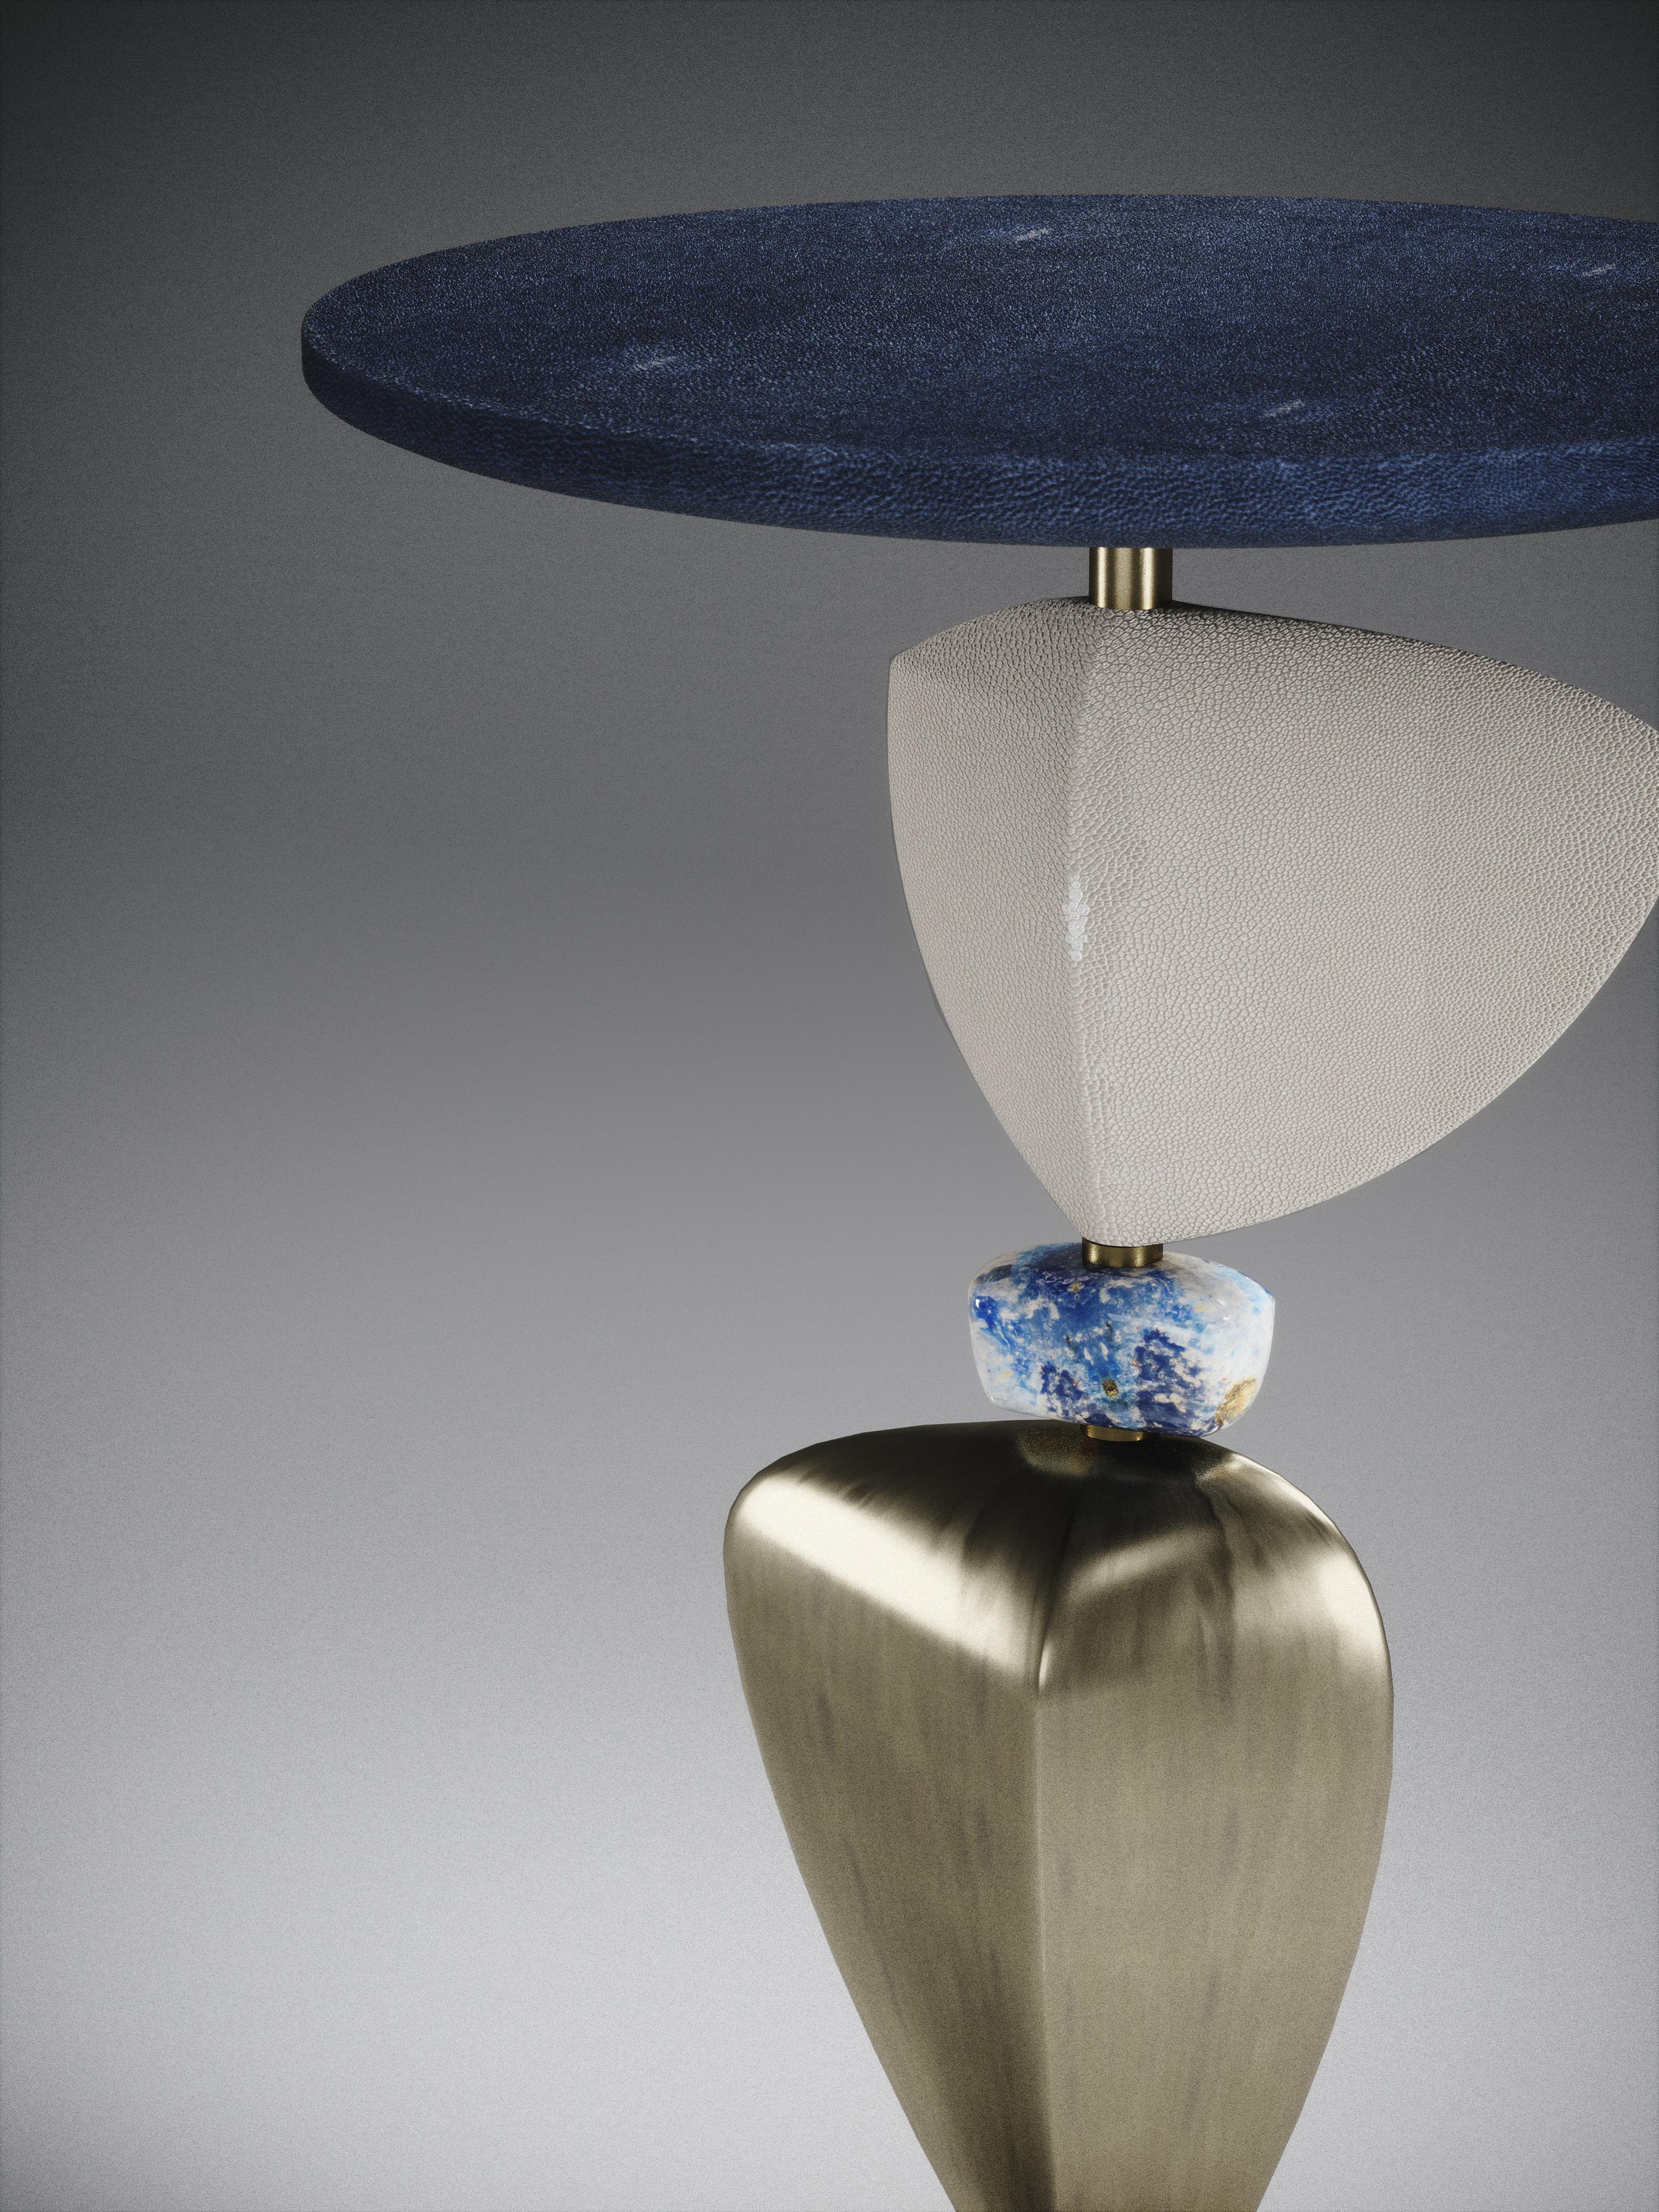 The Cosmo sky side table by Kifu Paris is a whimsical and sculptural piece, inlaid in denim blue shagreen, cream shagreen, lapis lazuli and bronze-patina brass. This piece is a sister to the original Cosmo side table by Kifu Paris, see images at end